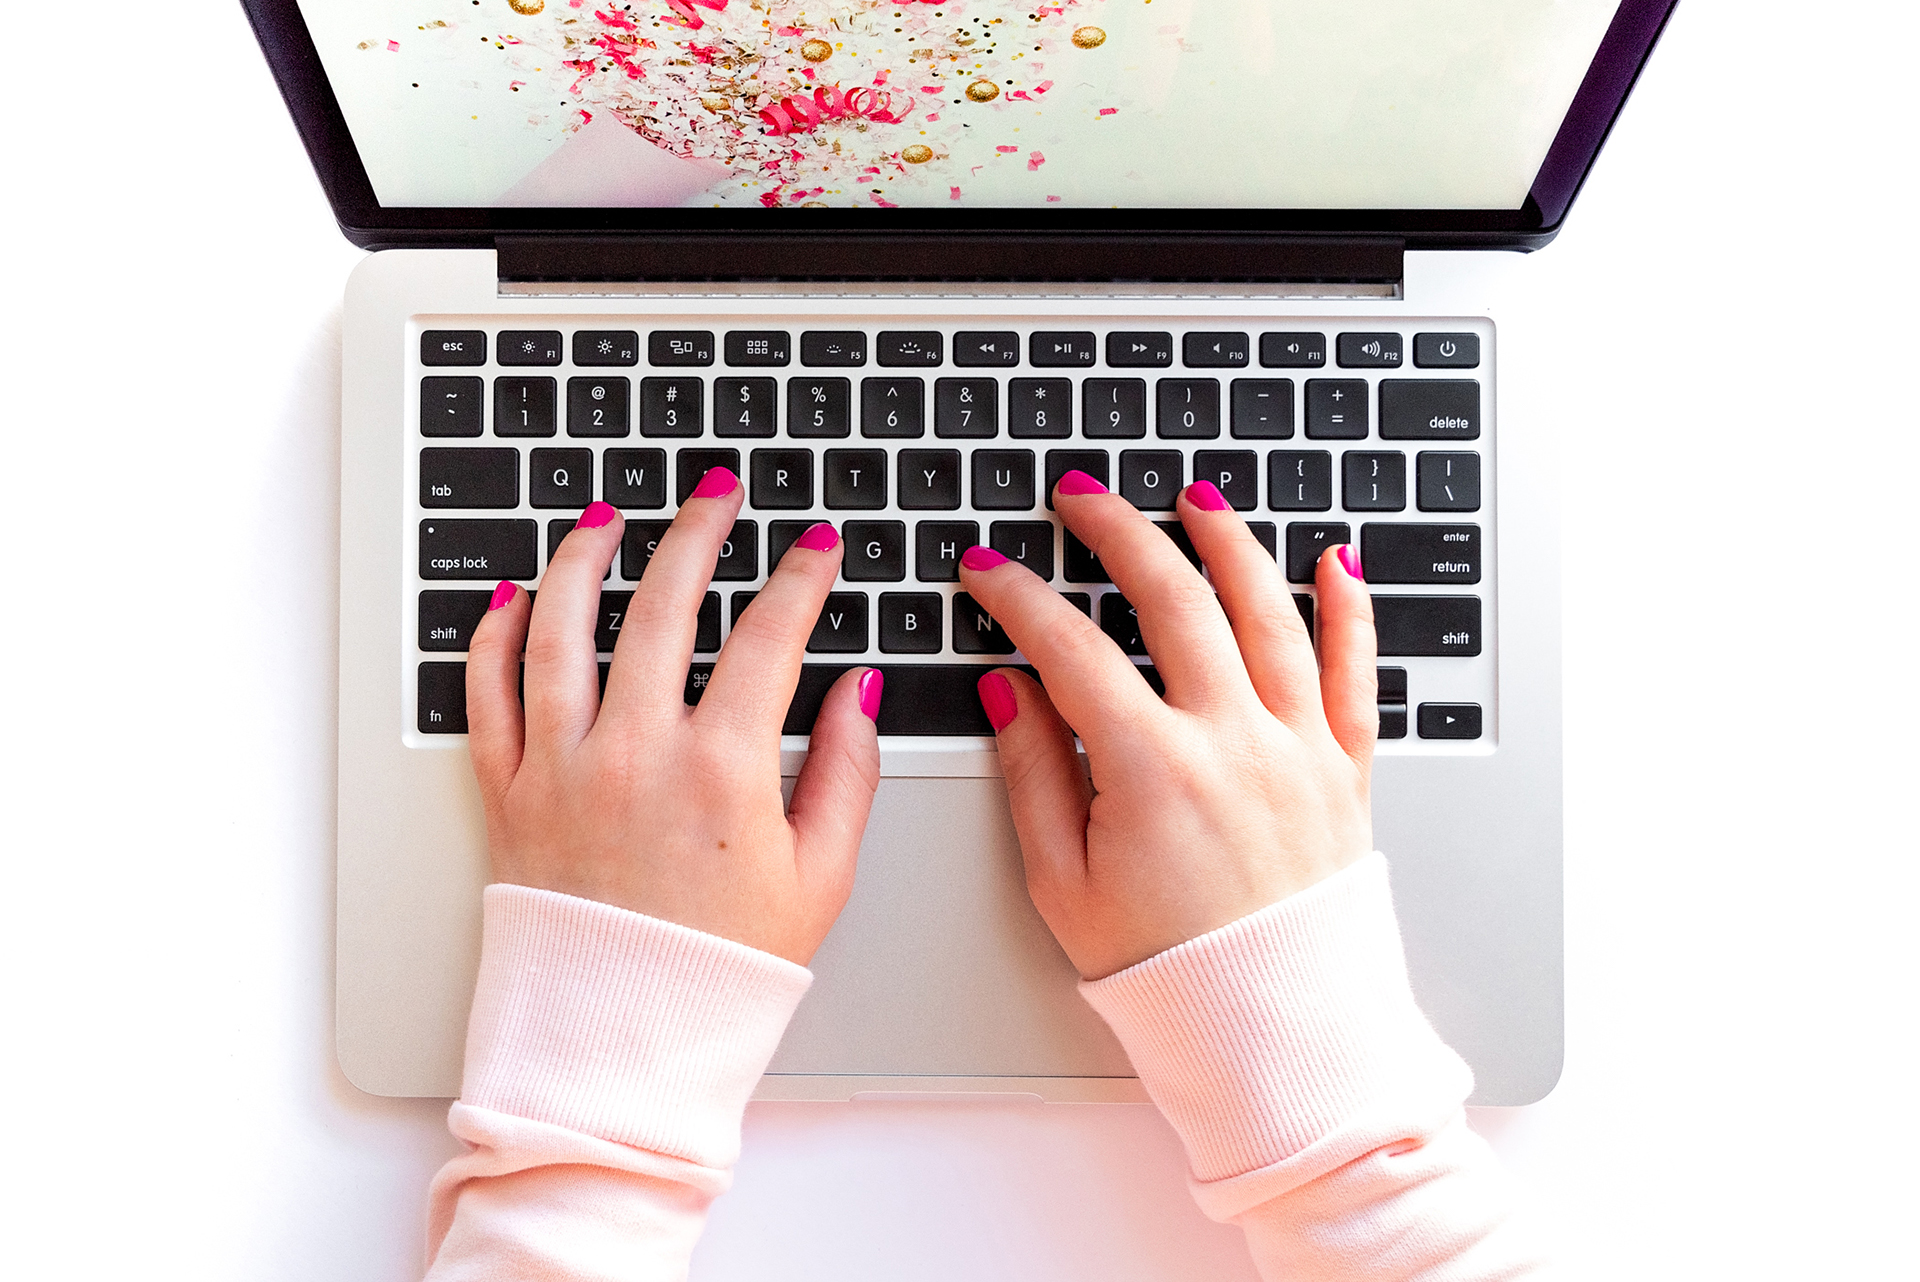 a woman with hot pink painted fingernails types on a laptop, photographed by jamie bannon photography.